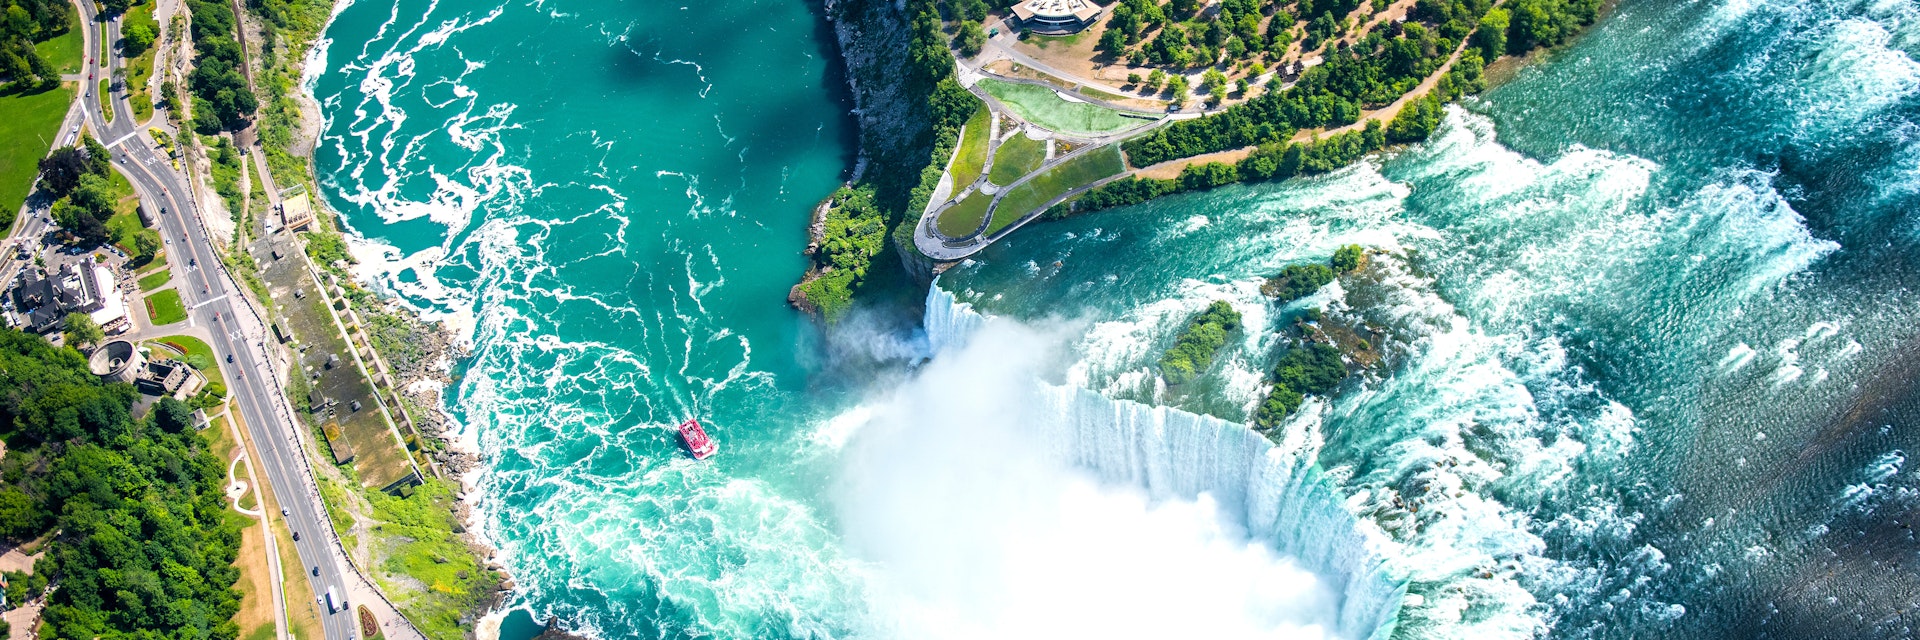 Aerial of Horseshoe Falls at Niagara Falls.
546768265
aerial, amazing, american, awesome, beautiful, beauty, blue, boats, bridge, canada, canadian, color, drop, fall, flow, helicopter view, horseshoe, landmark, landscape, light, maid, majestic, mist, natural, nature, new, niagara, north, ontario, outdoors, park, power, powerful, rainbow, rapids, river, rock, rocky, scenic, sky, spectacular, speed, stunning, toronto, tour, tourism, travel, view, water, waterfall